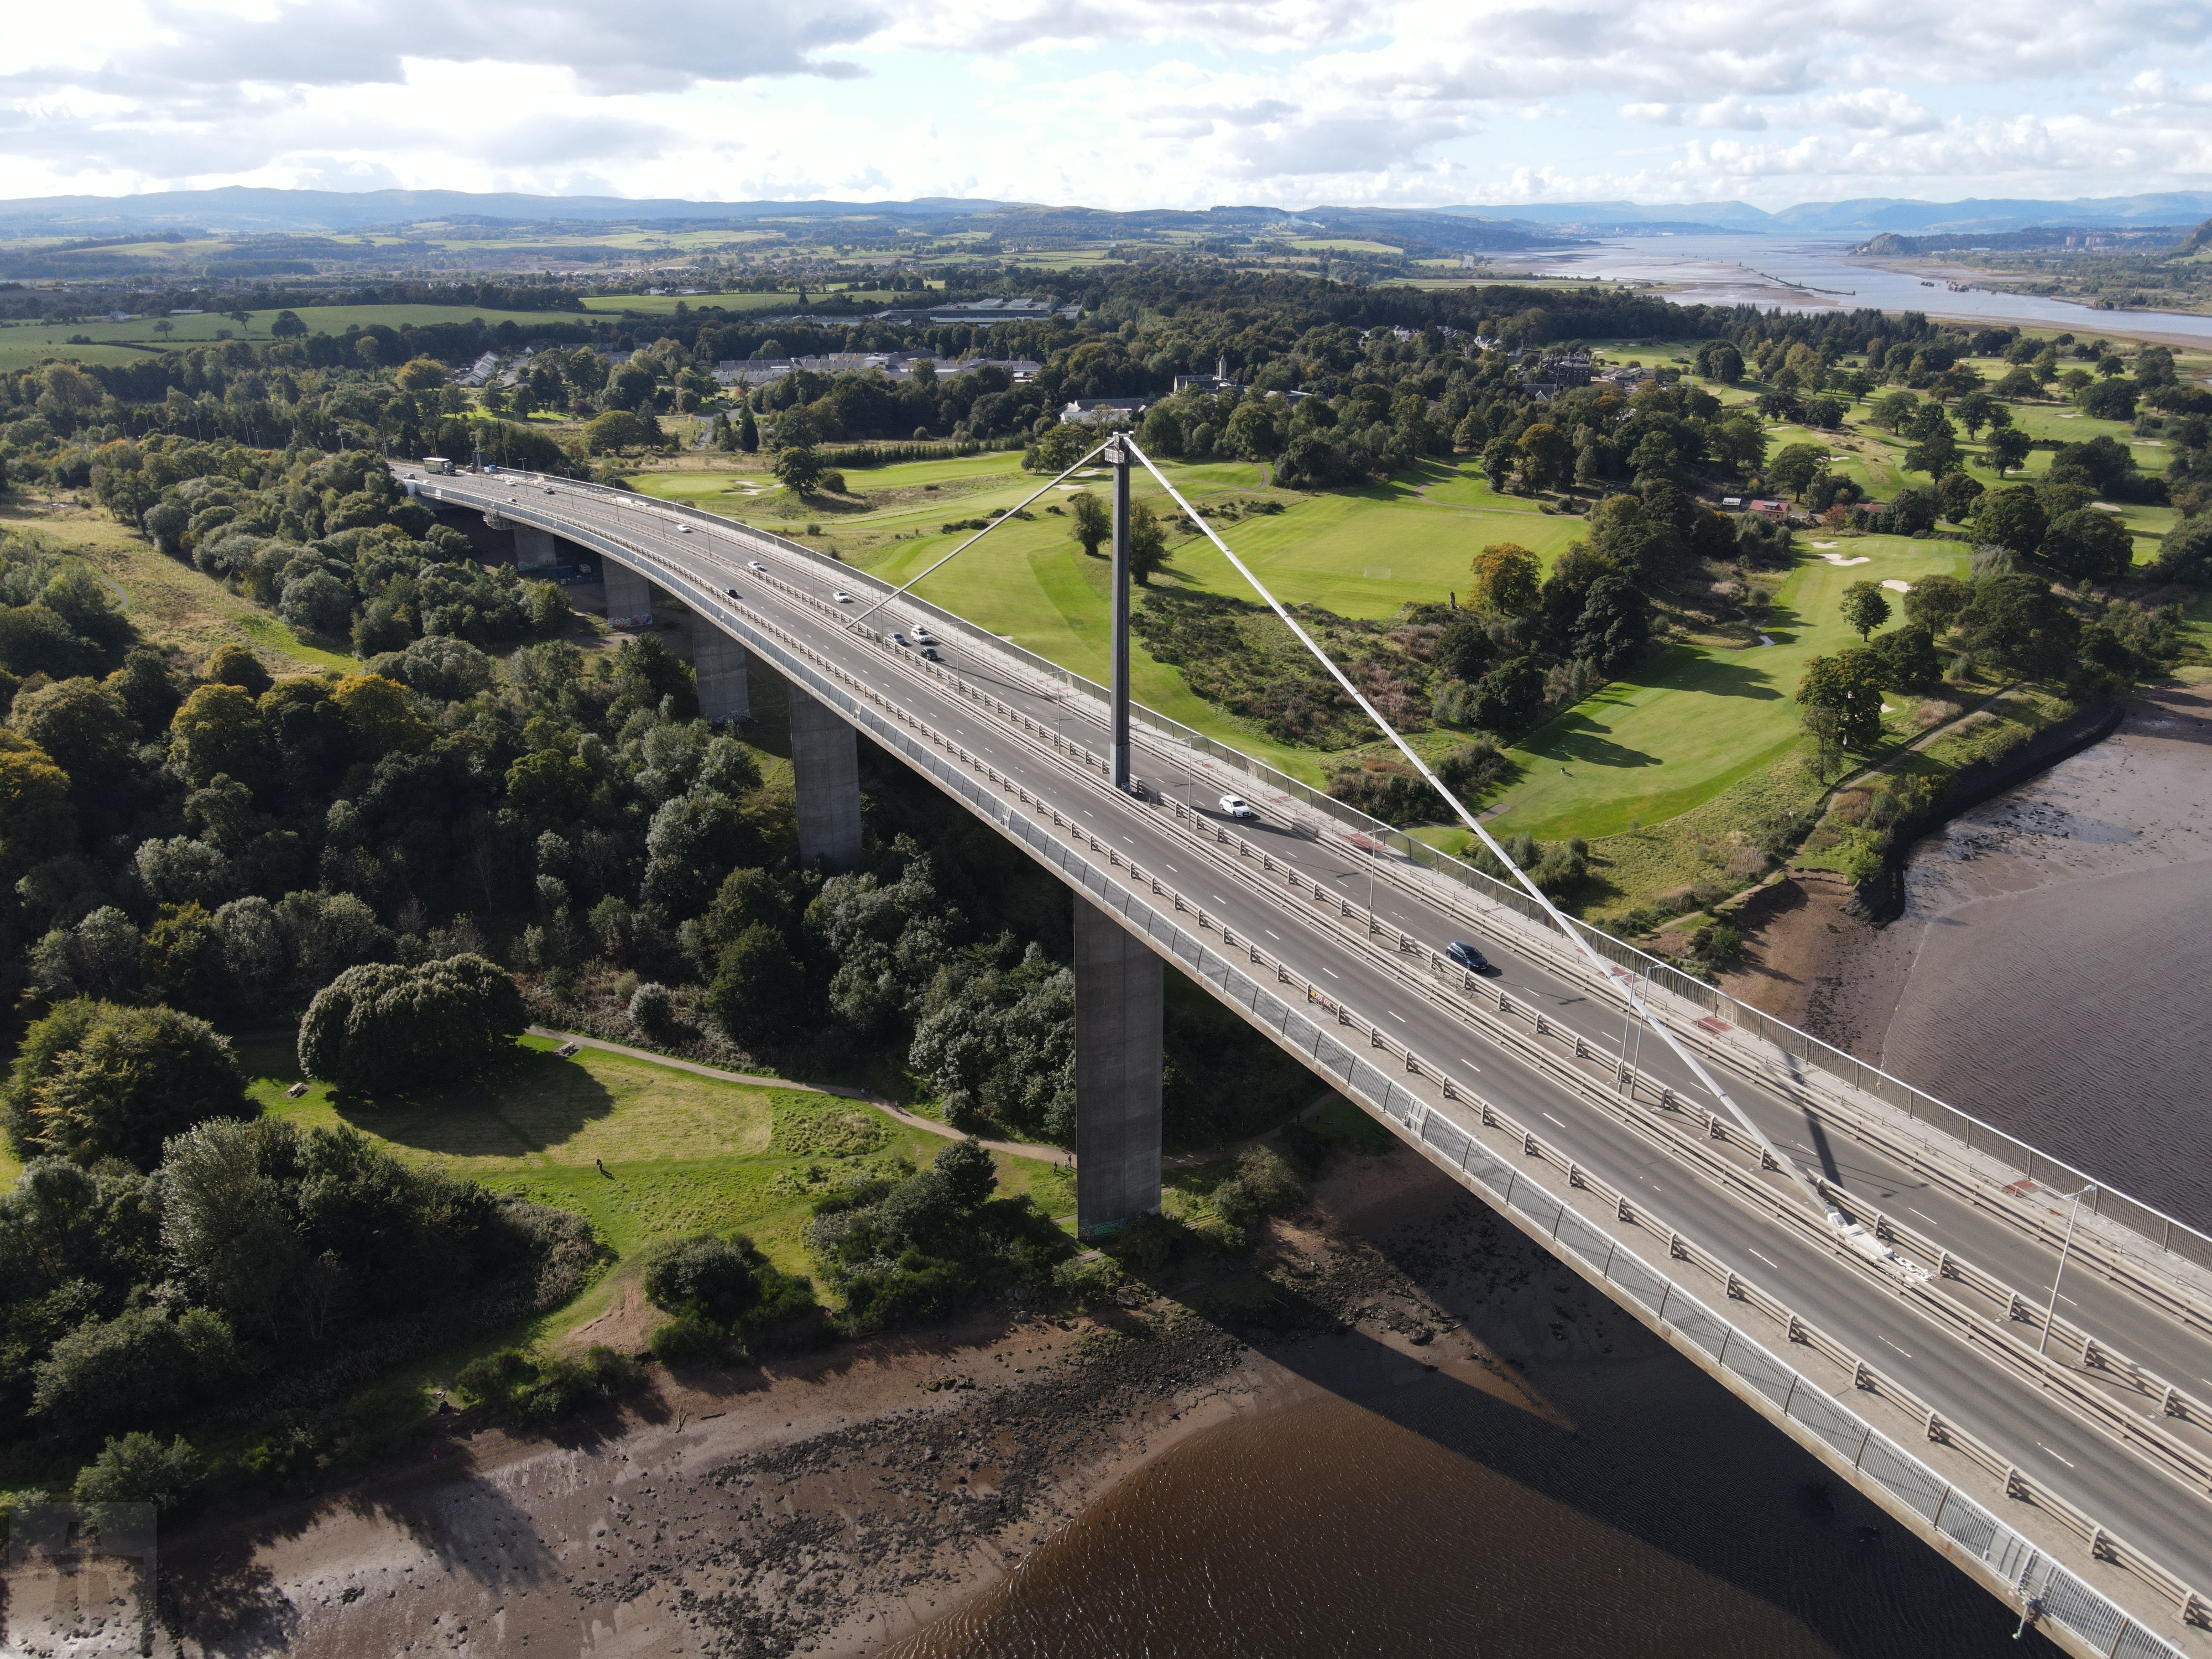 An aerial view of the Erskine Bridge in 2020.